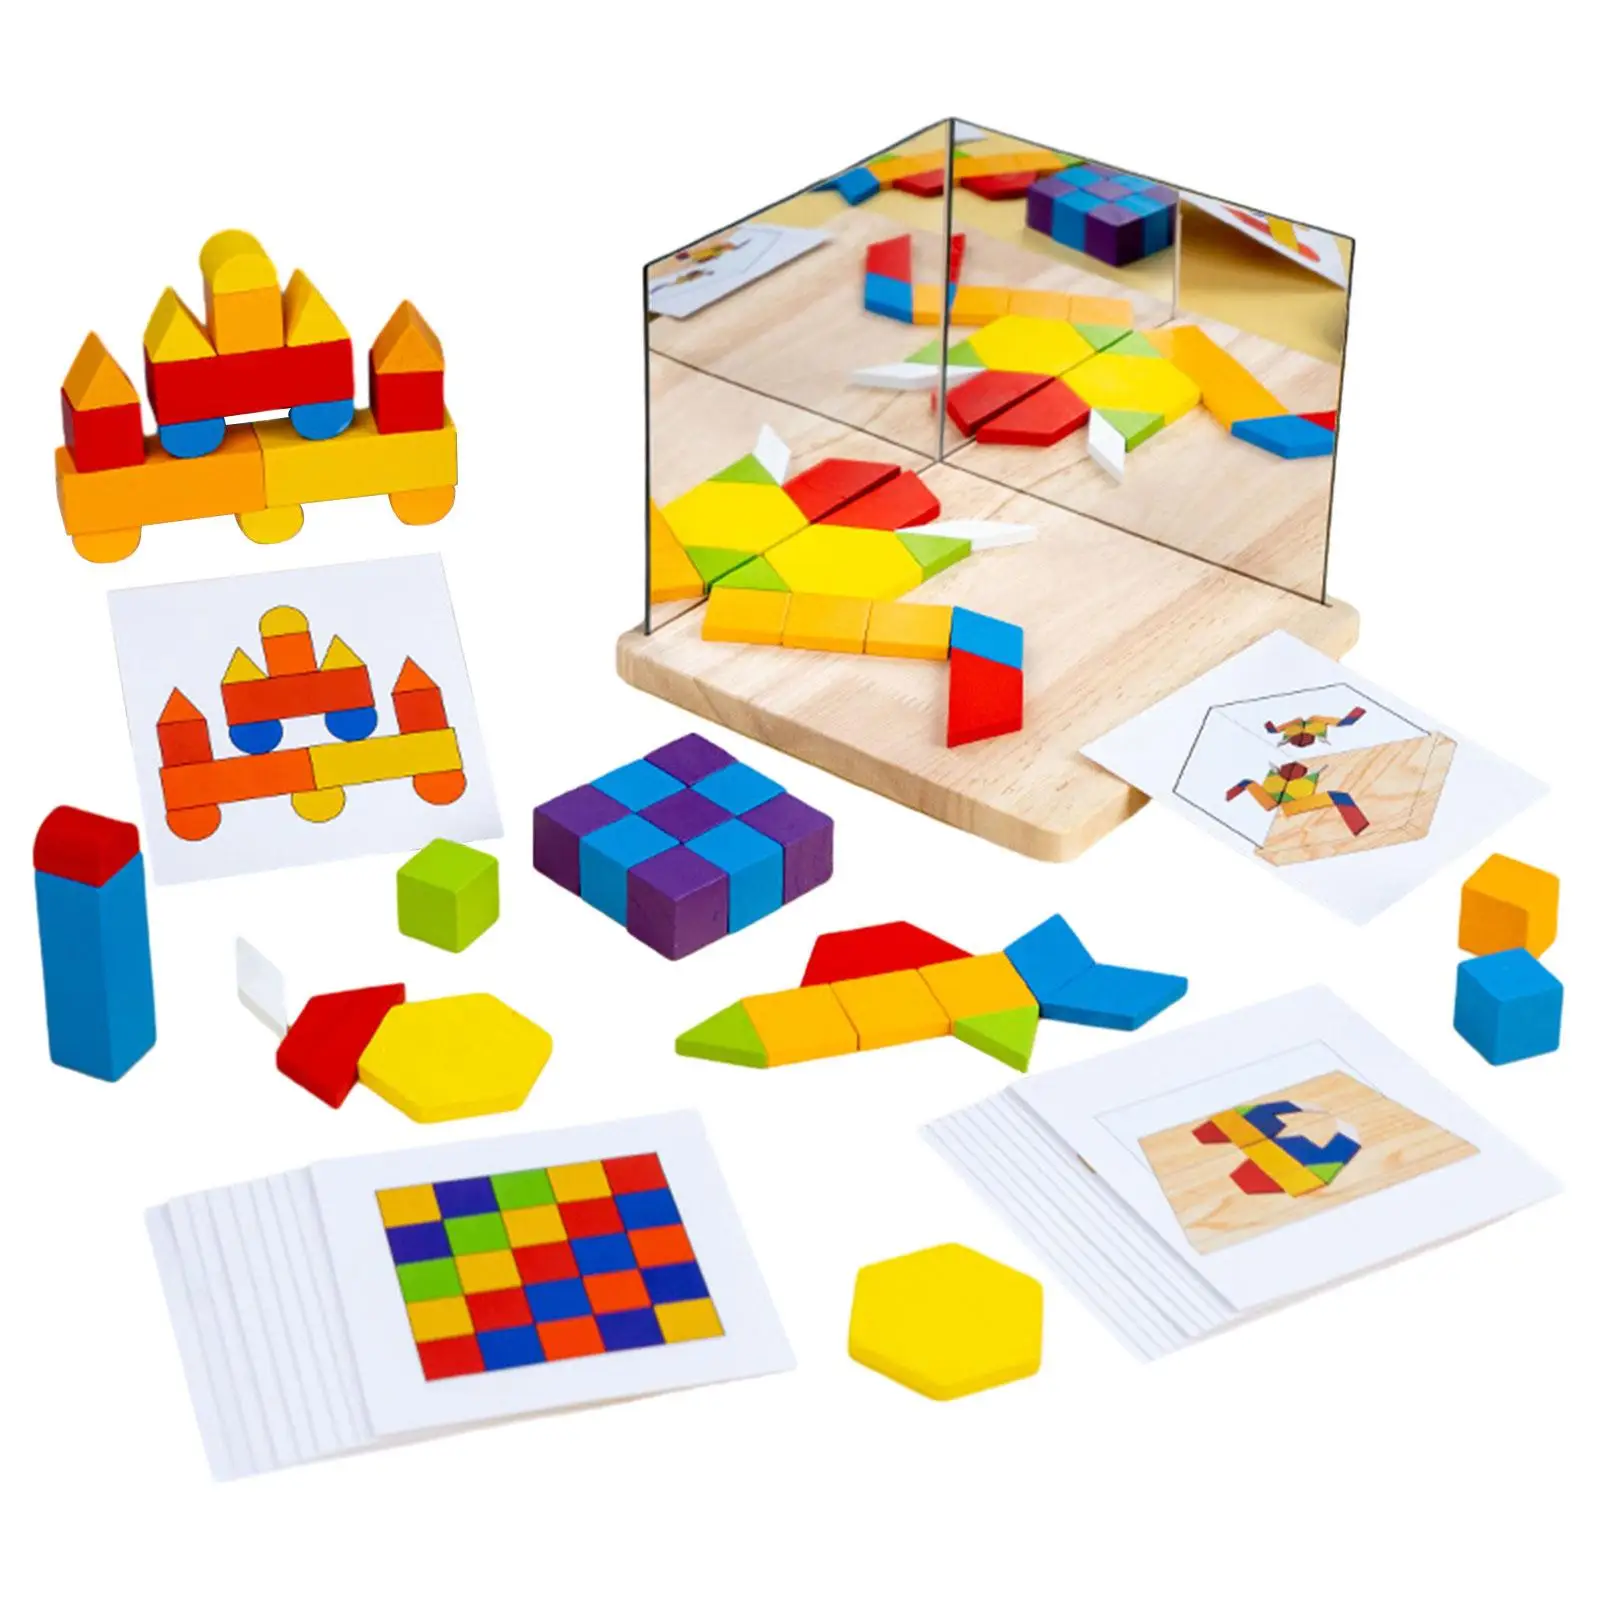 Mirror Imaging Puzzle Games Spatial Thinking Brain Development Space Imagination Blocks for Girls Children Valentines Day Gifts